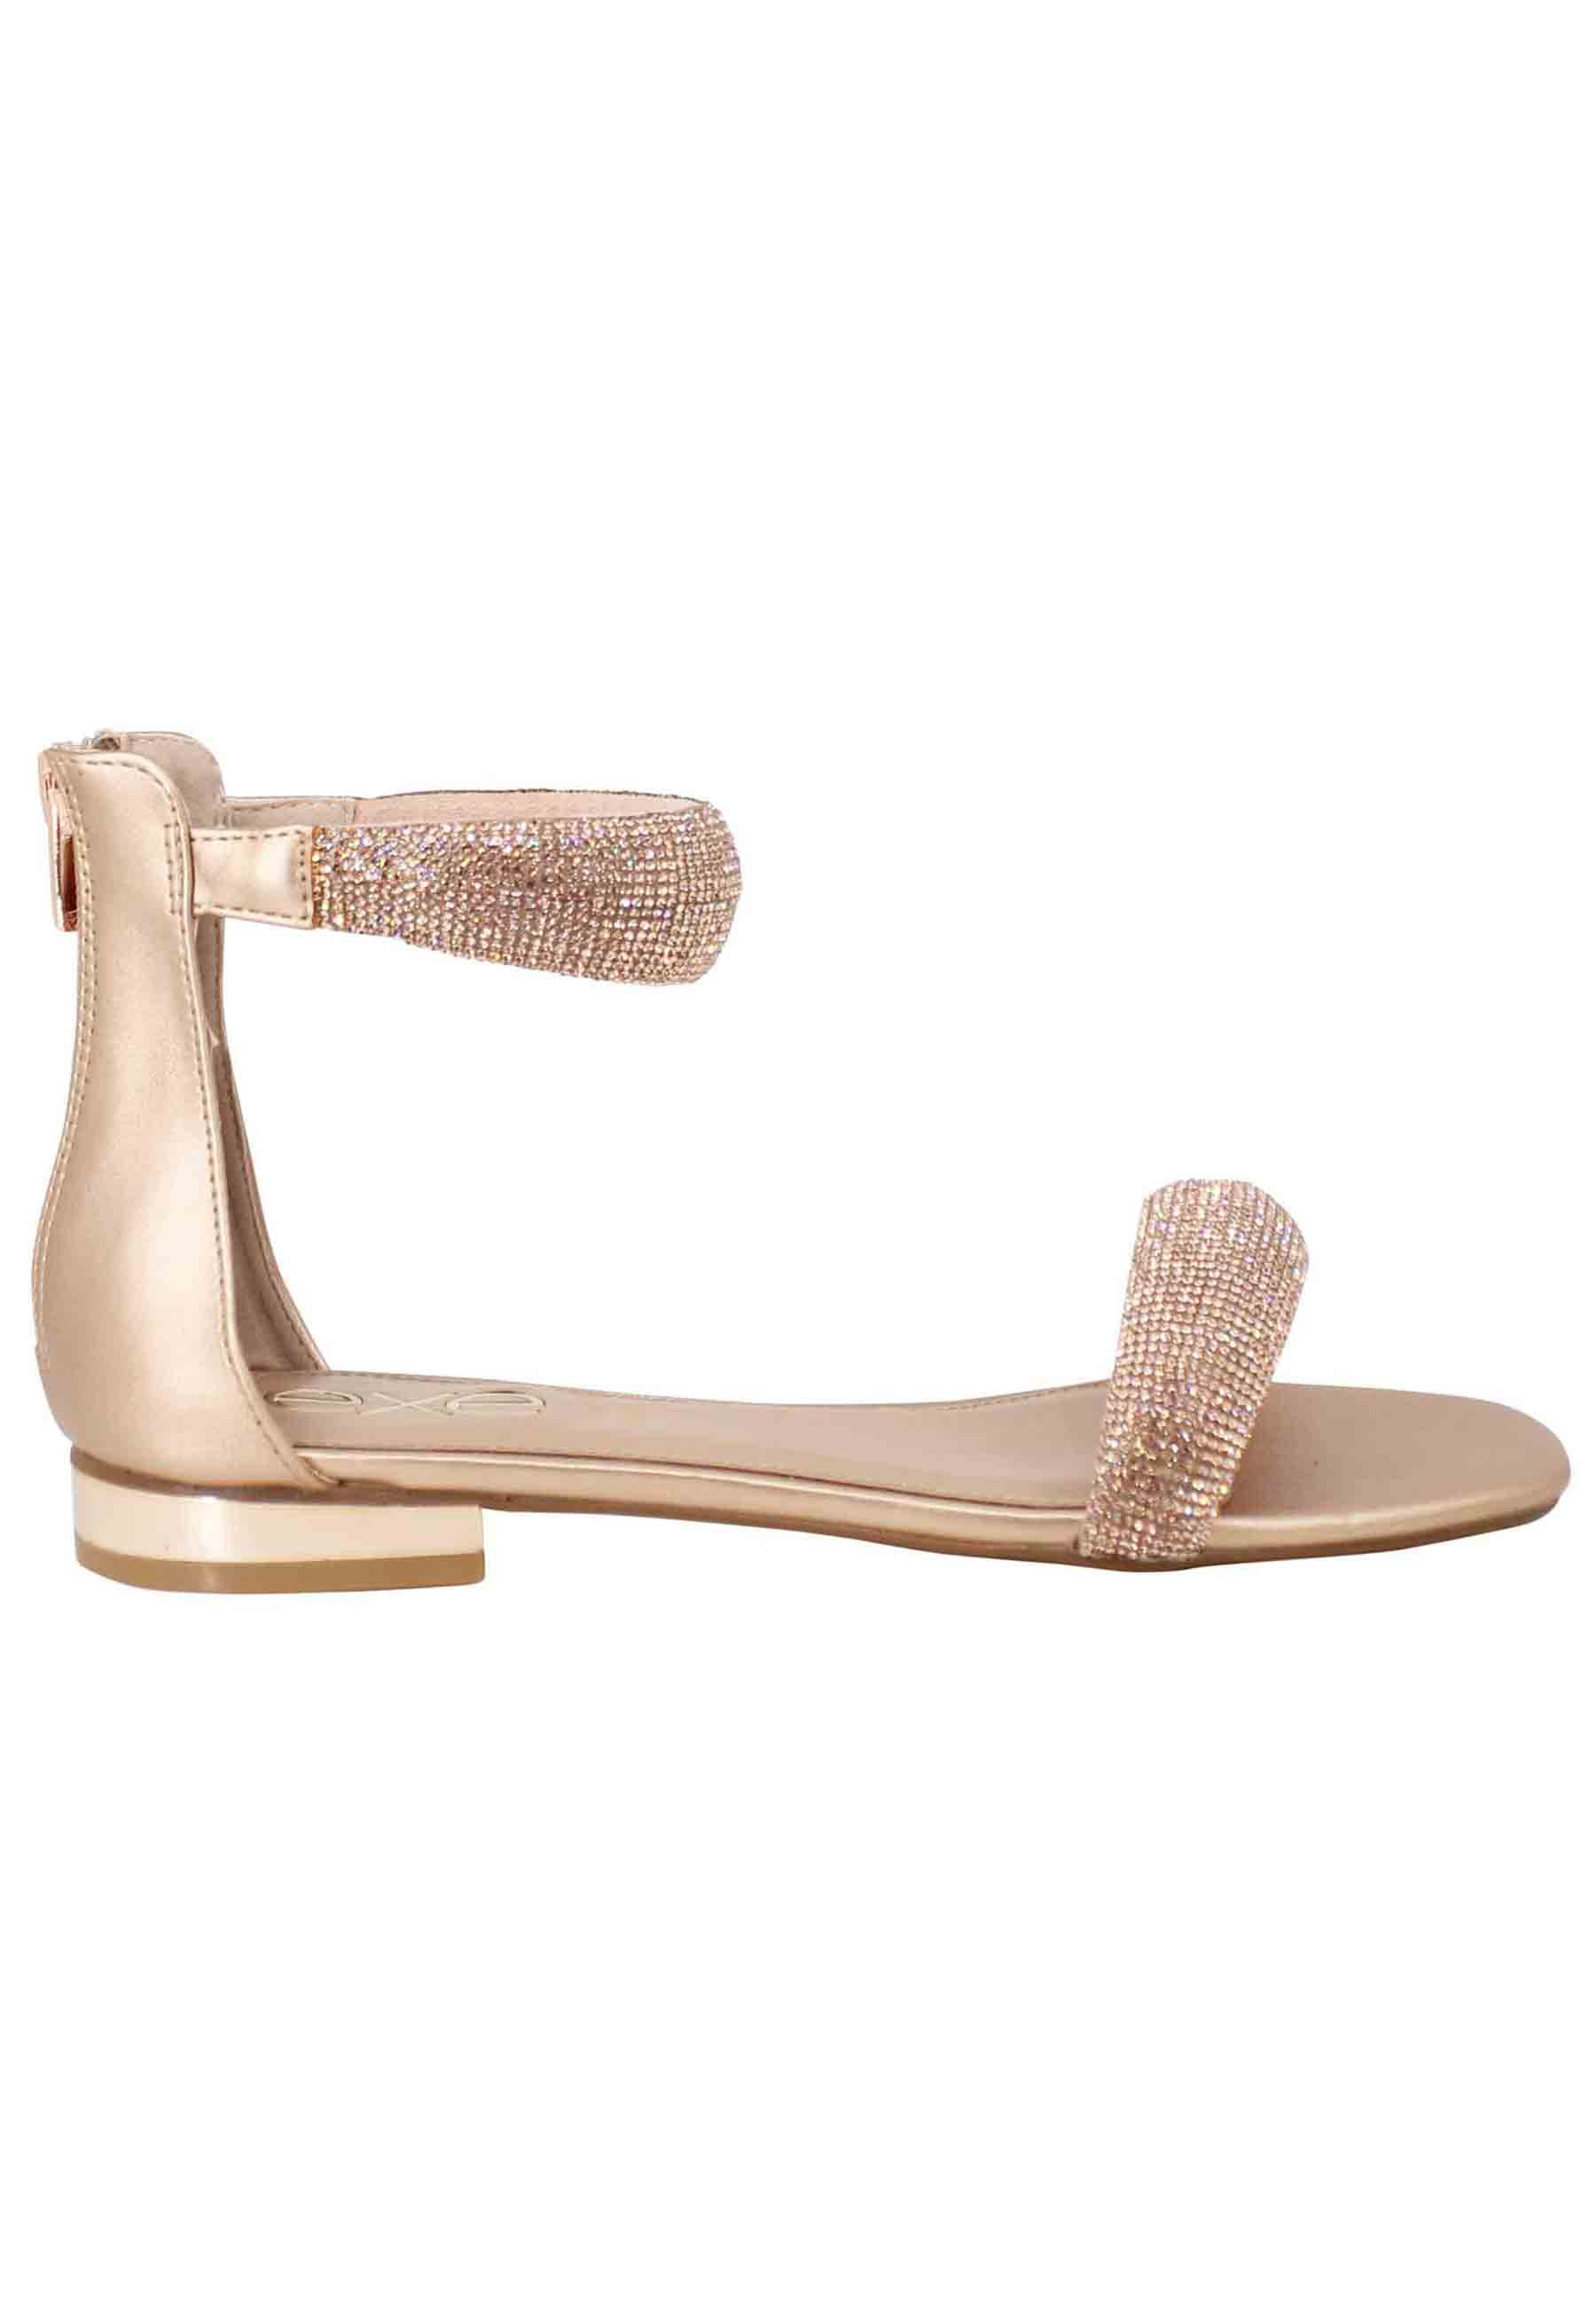 Women's flat sandals in pink rhinestones with low heel and ankle strap